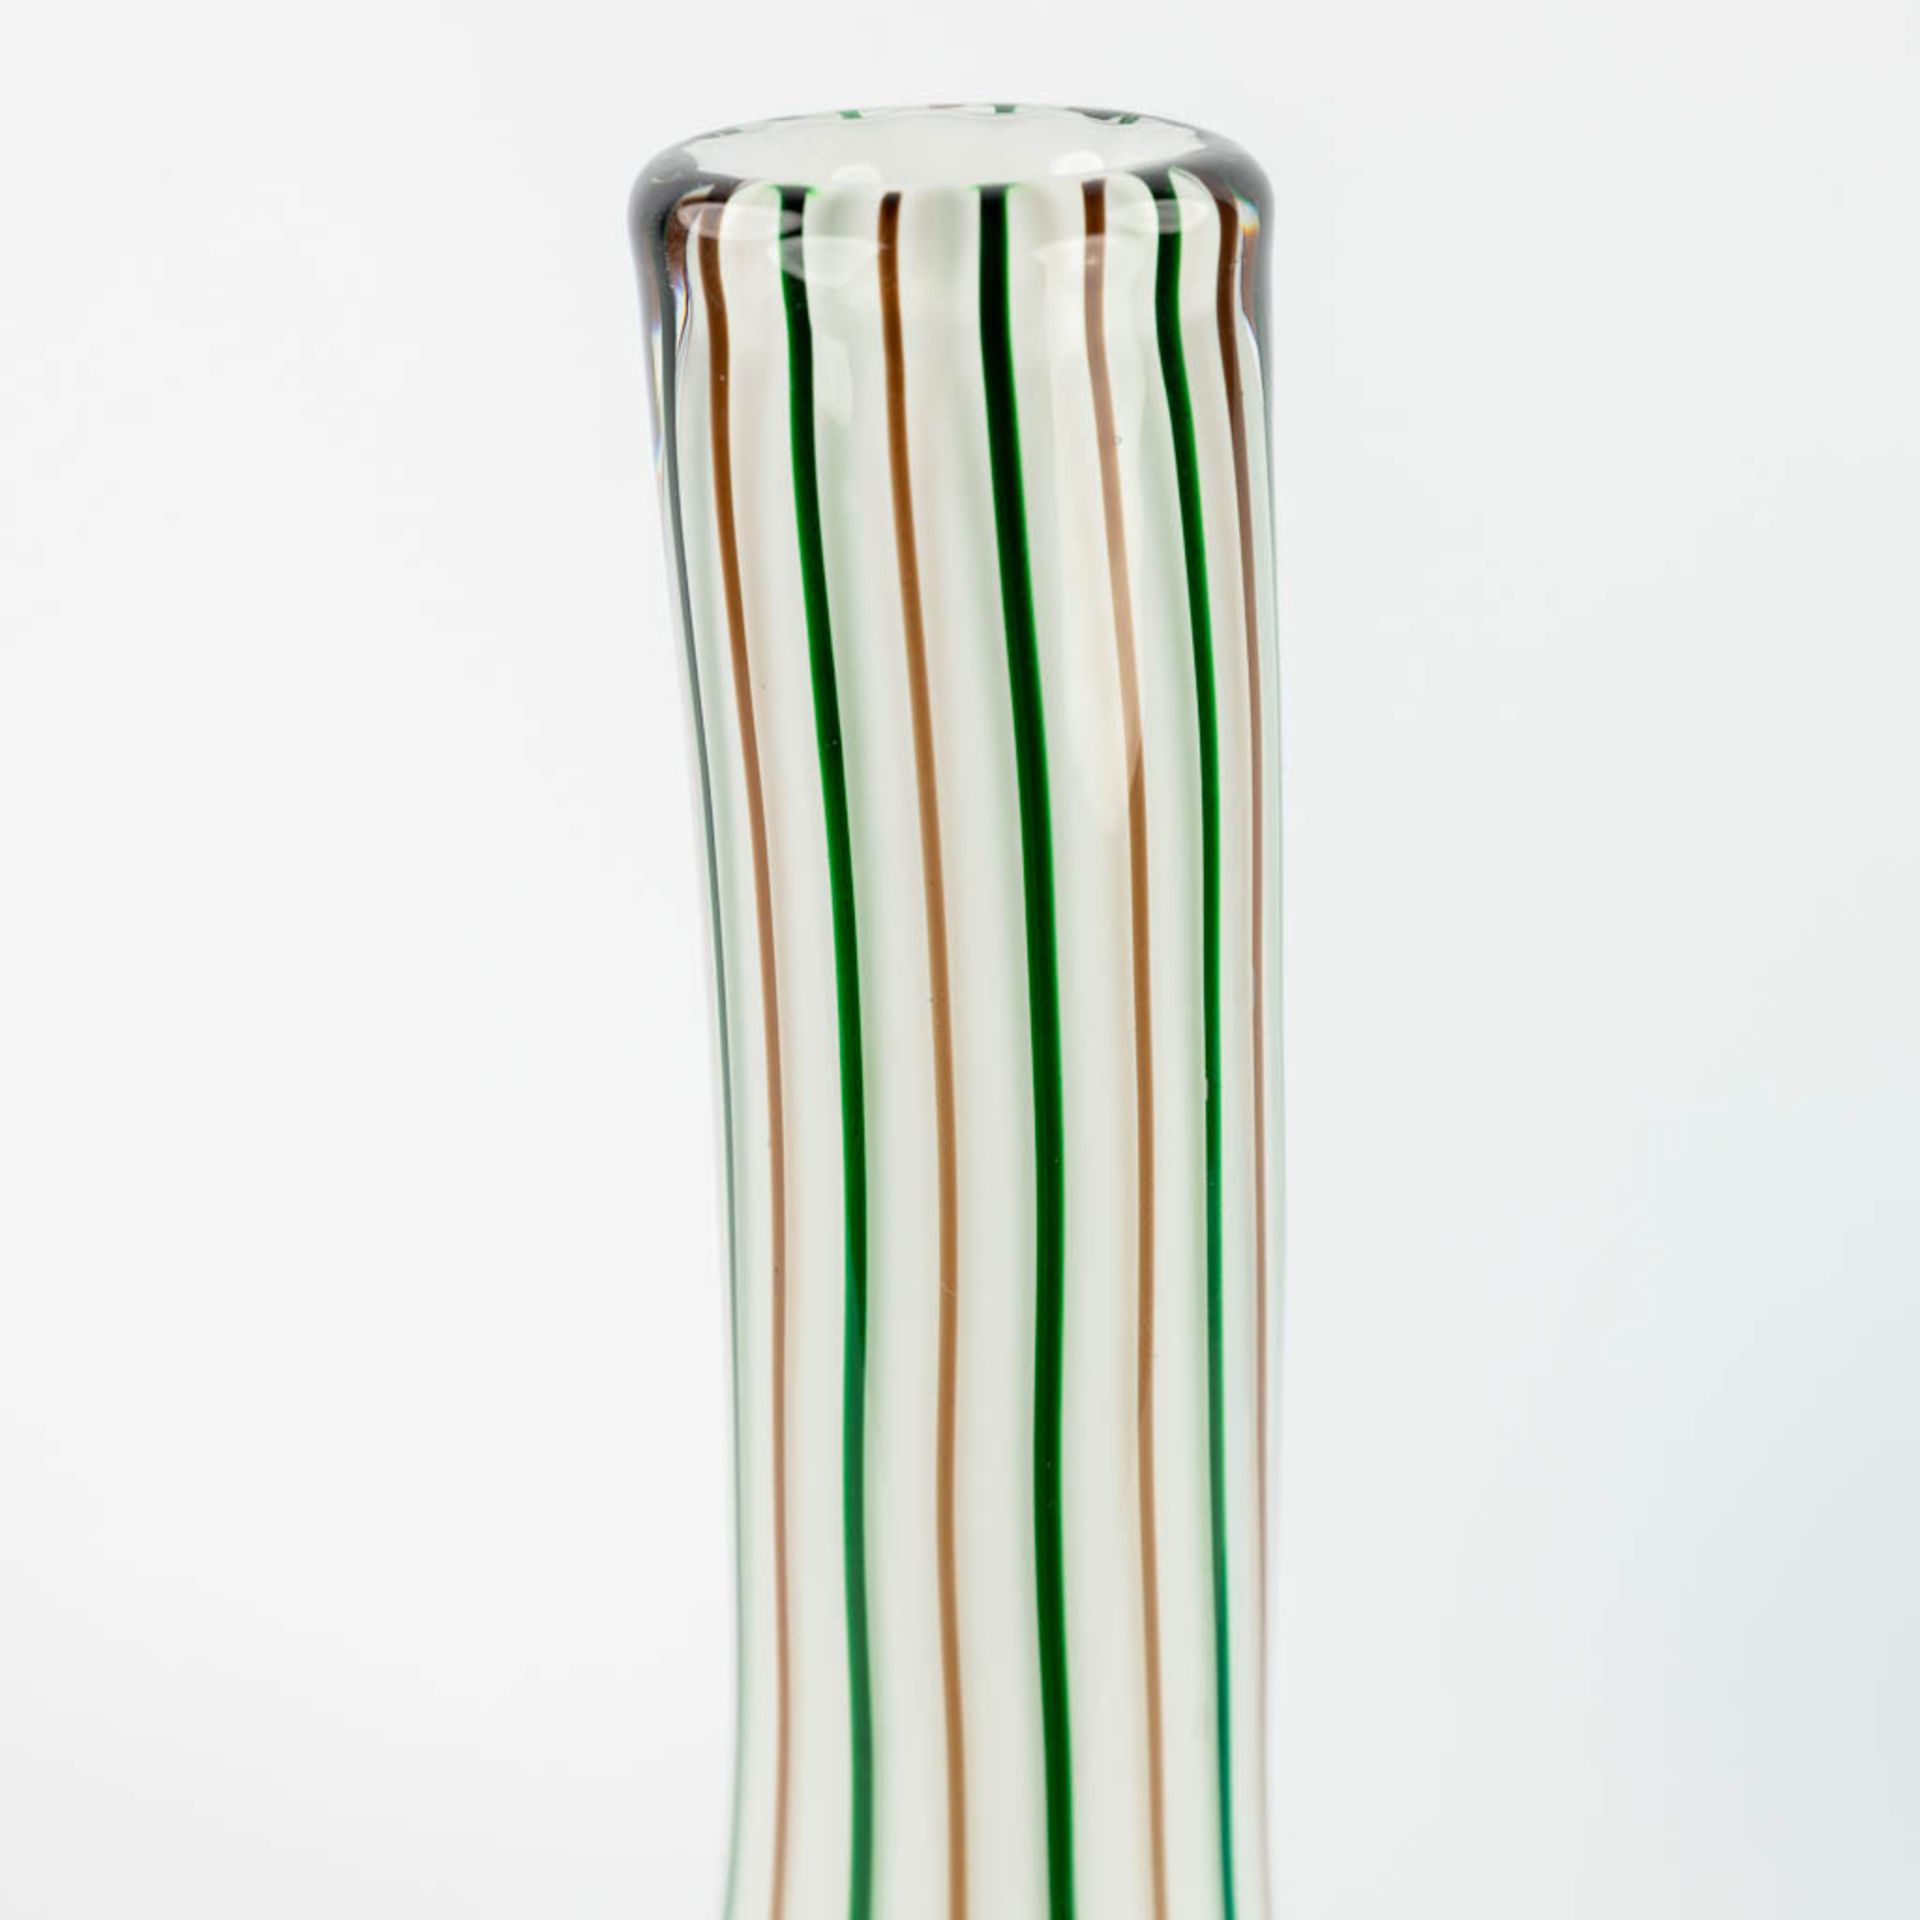 A collection of 5 glass vases, made in Murano, Italy and Scandinavia. (H: 45 x D: 10 cm) - Image 13 of 13